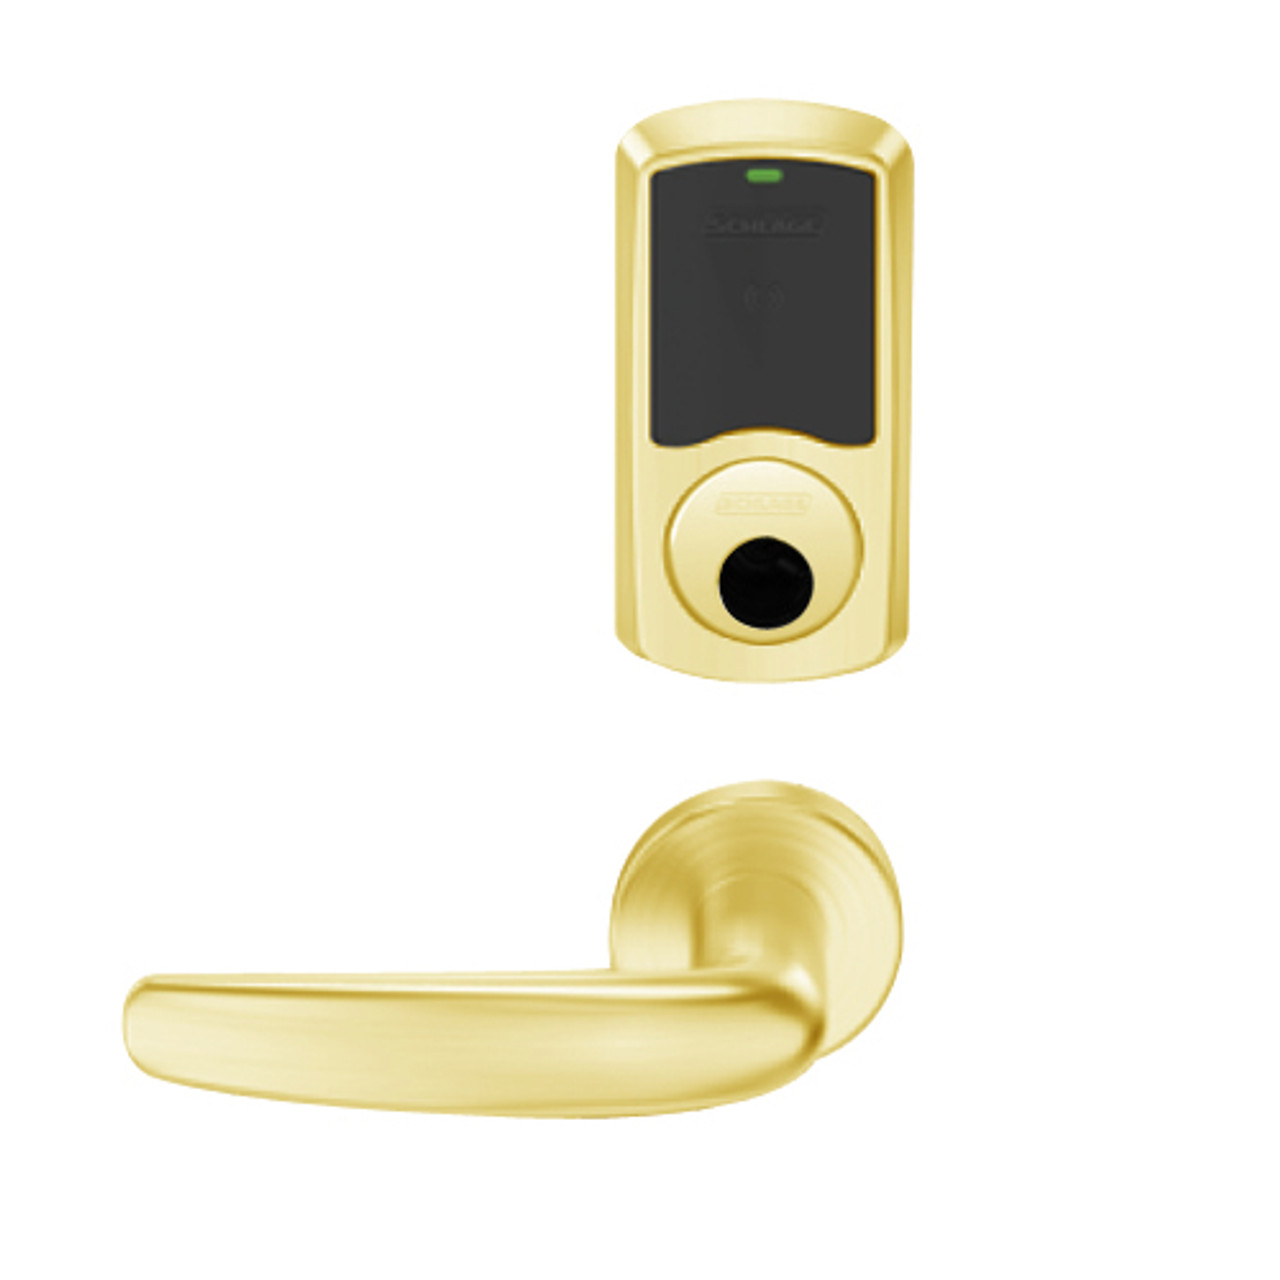 LEMB-GRW-L-07-605-00A Schlage Less Cylinder Privacy/Office Wireless Greenwich Mortise Lock with Push Button & LED Indicator and Athens Lever in Bright Brass